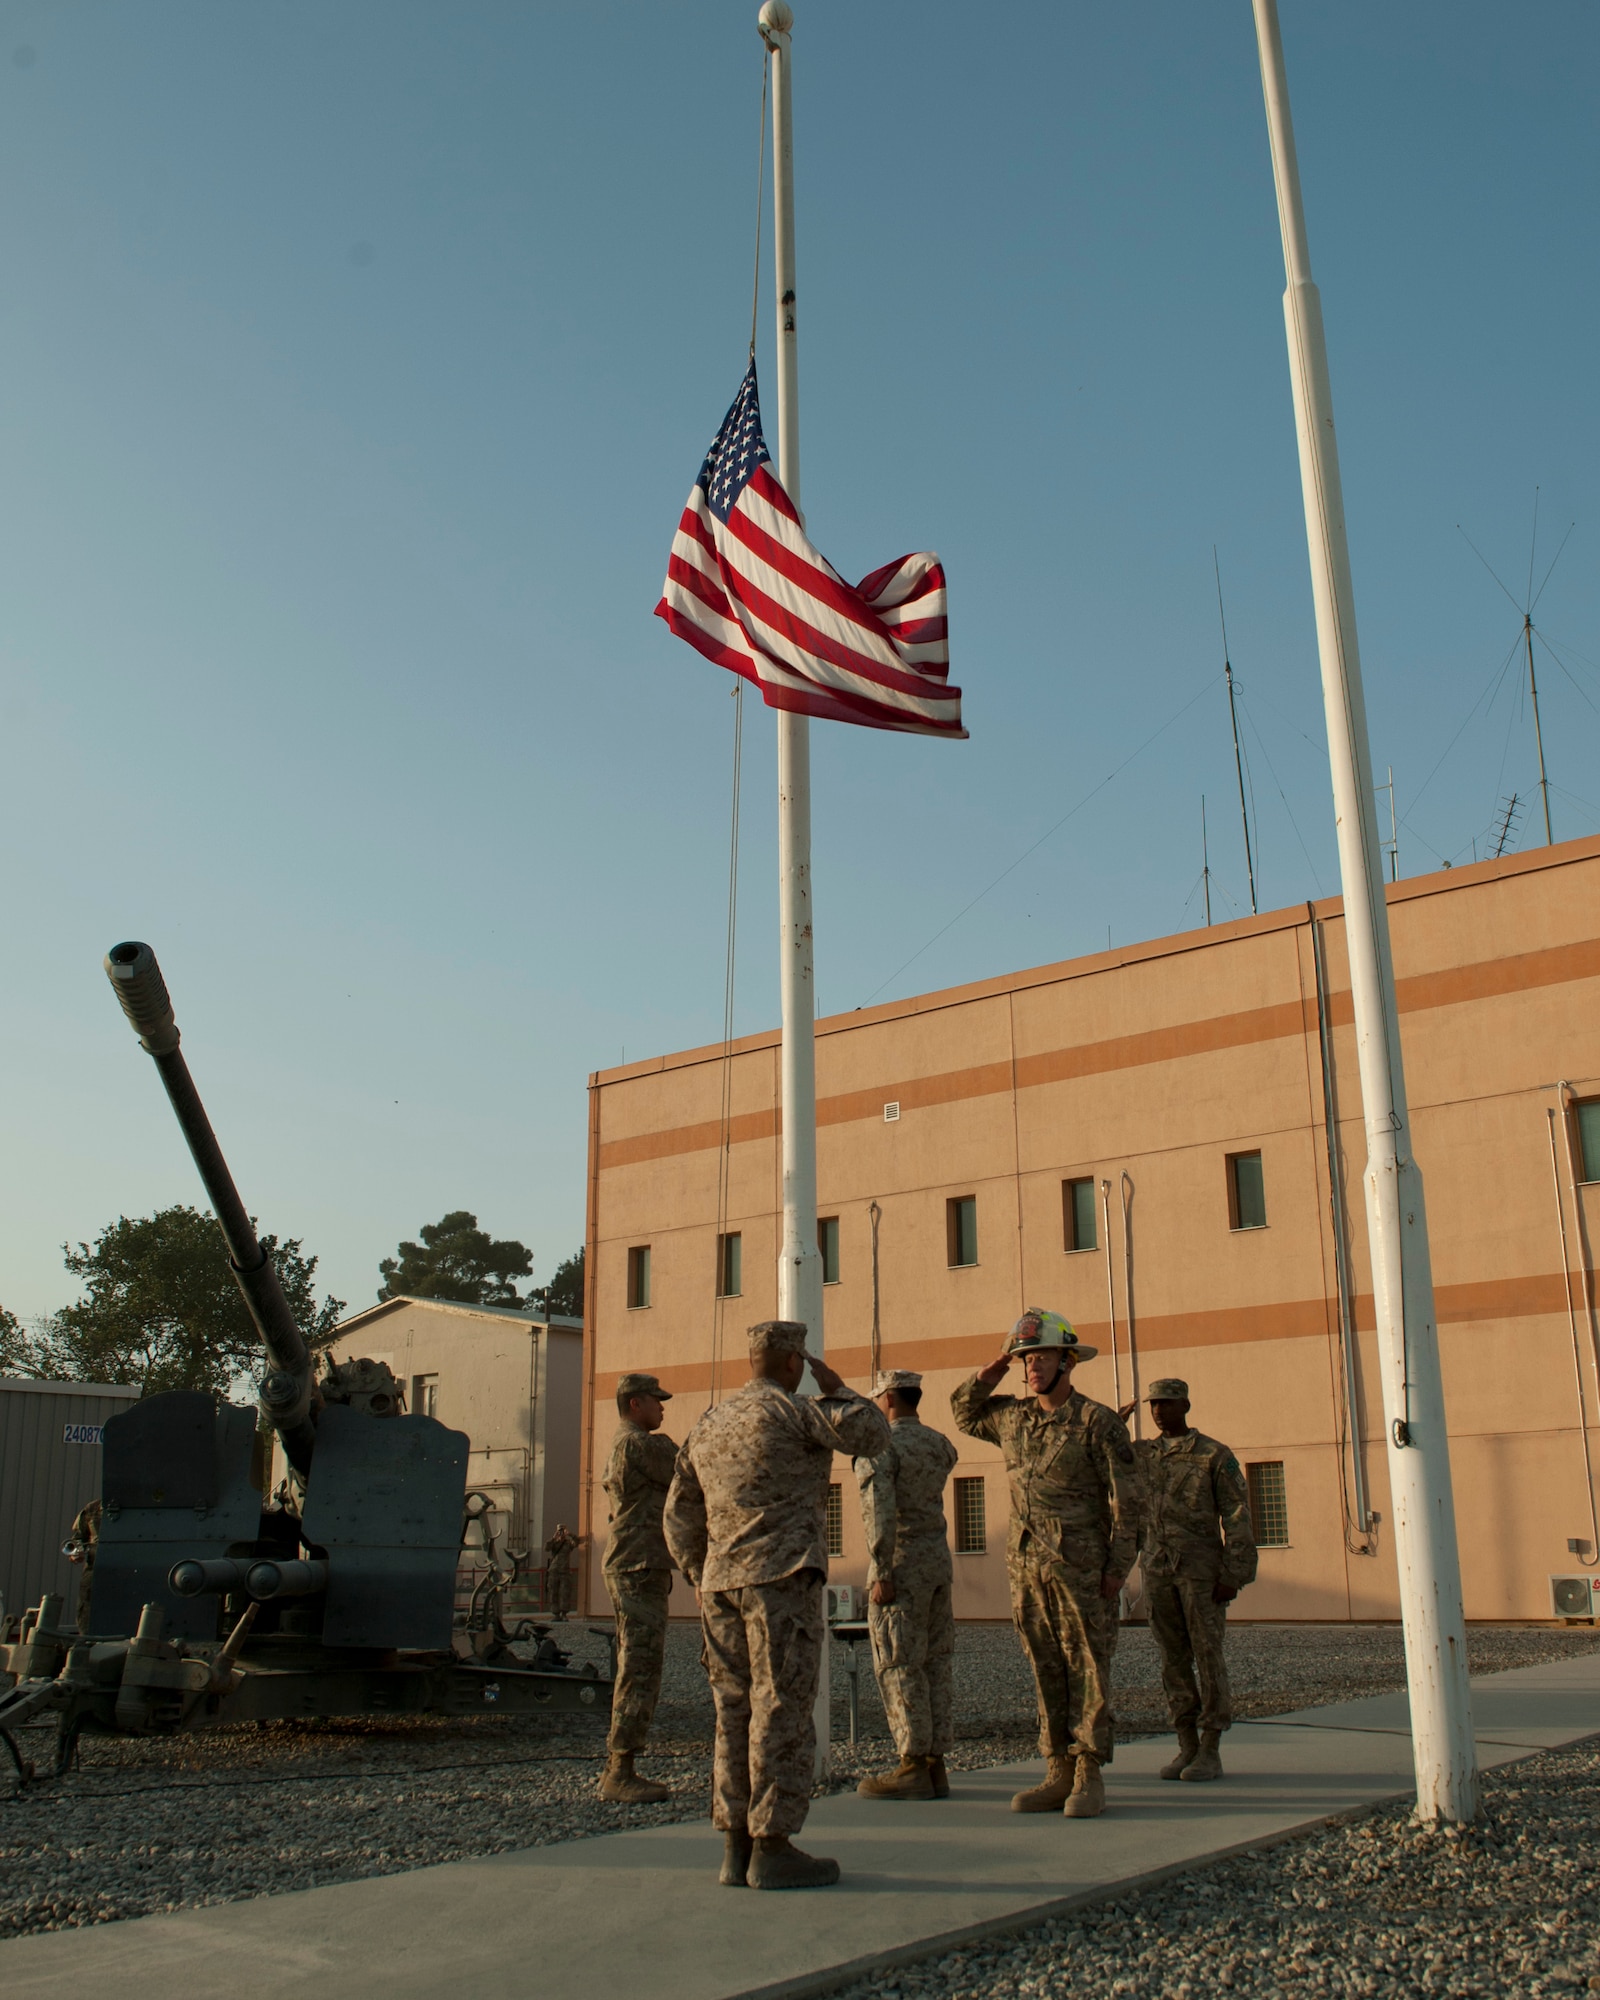 A joint service honor guard lowers the flag during a retreat ceremony as part of a 9/11 remembrance ceremony, Bagram Airfield, Afghanistan, Sept. 11, 2016. The ceremony was held to honor those who lost their lives during the attacks on Sept. 11, 2001, 15 years ago. (U.S. Air Force photo by Capt. Korey Fratini